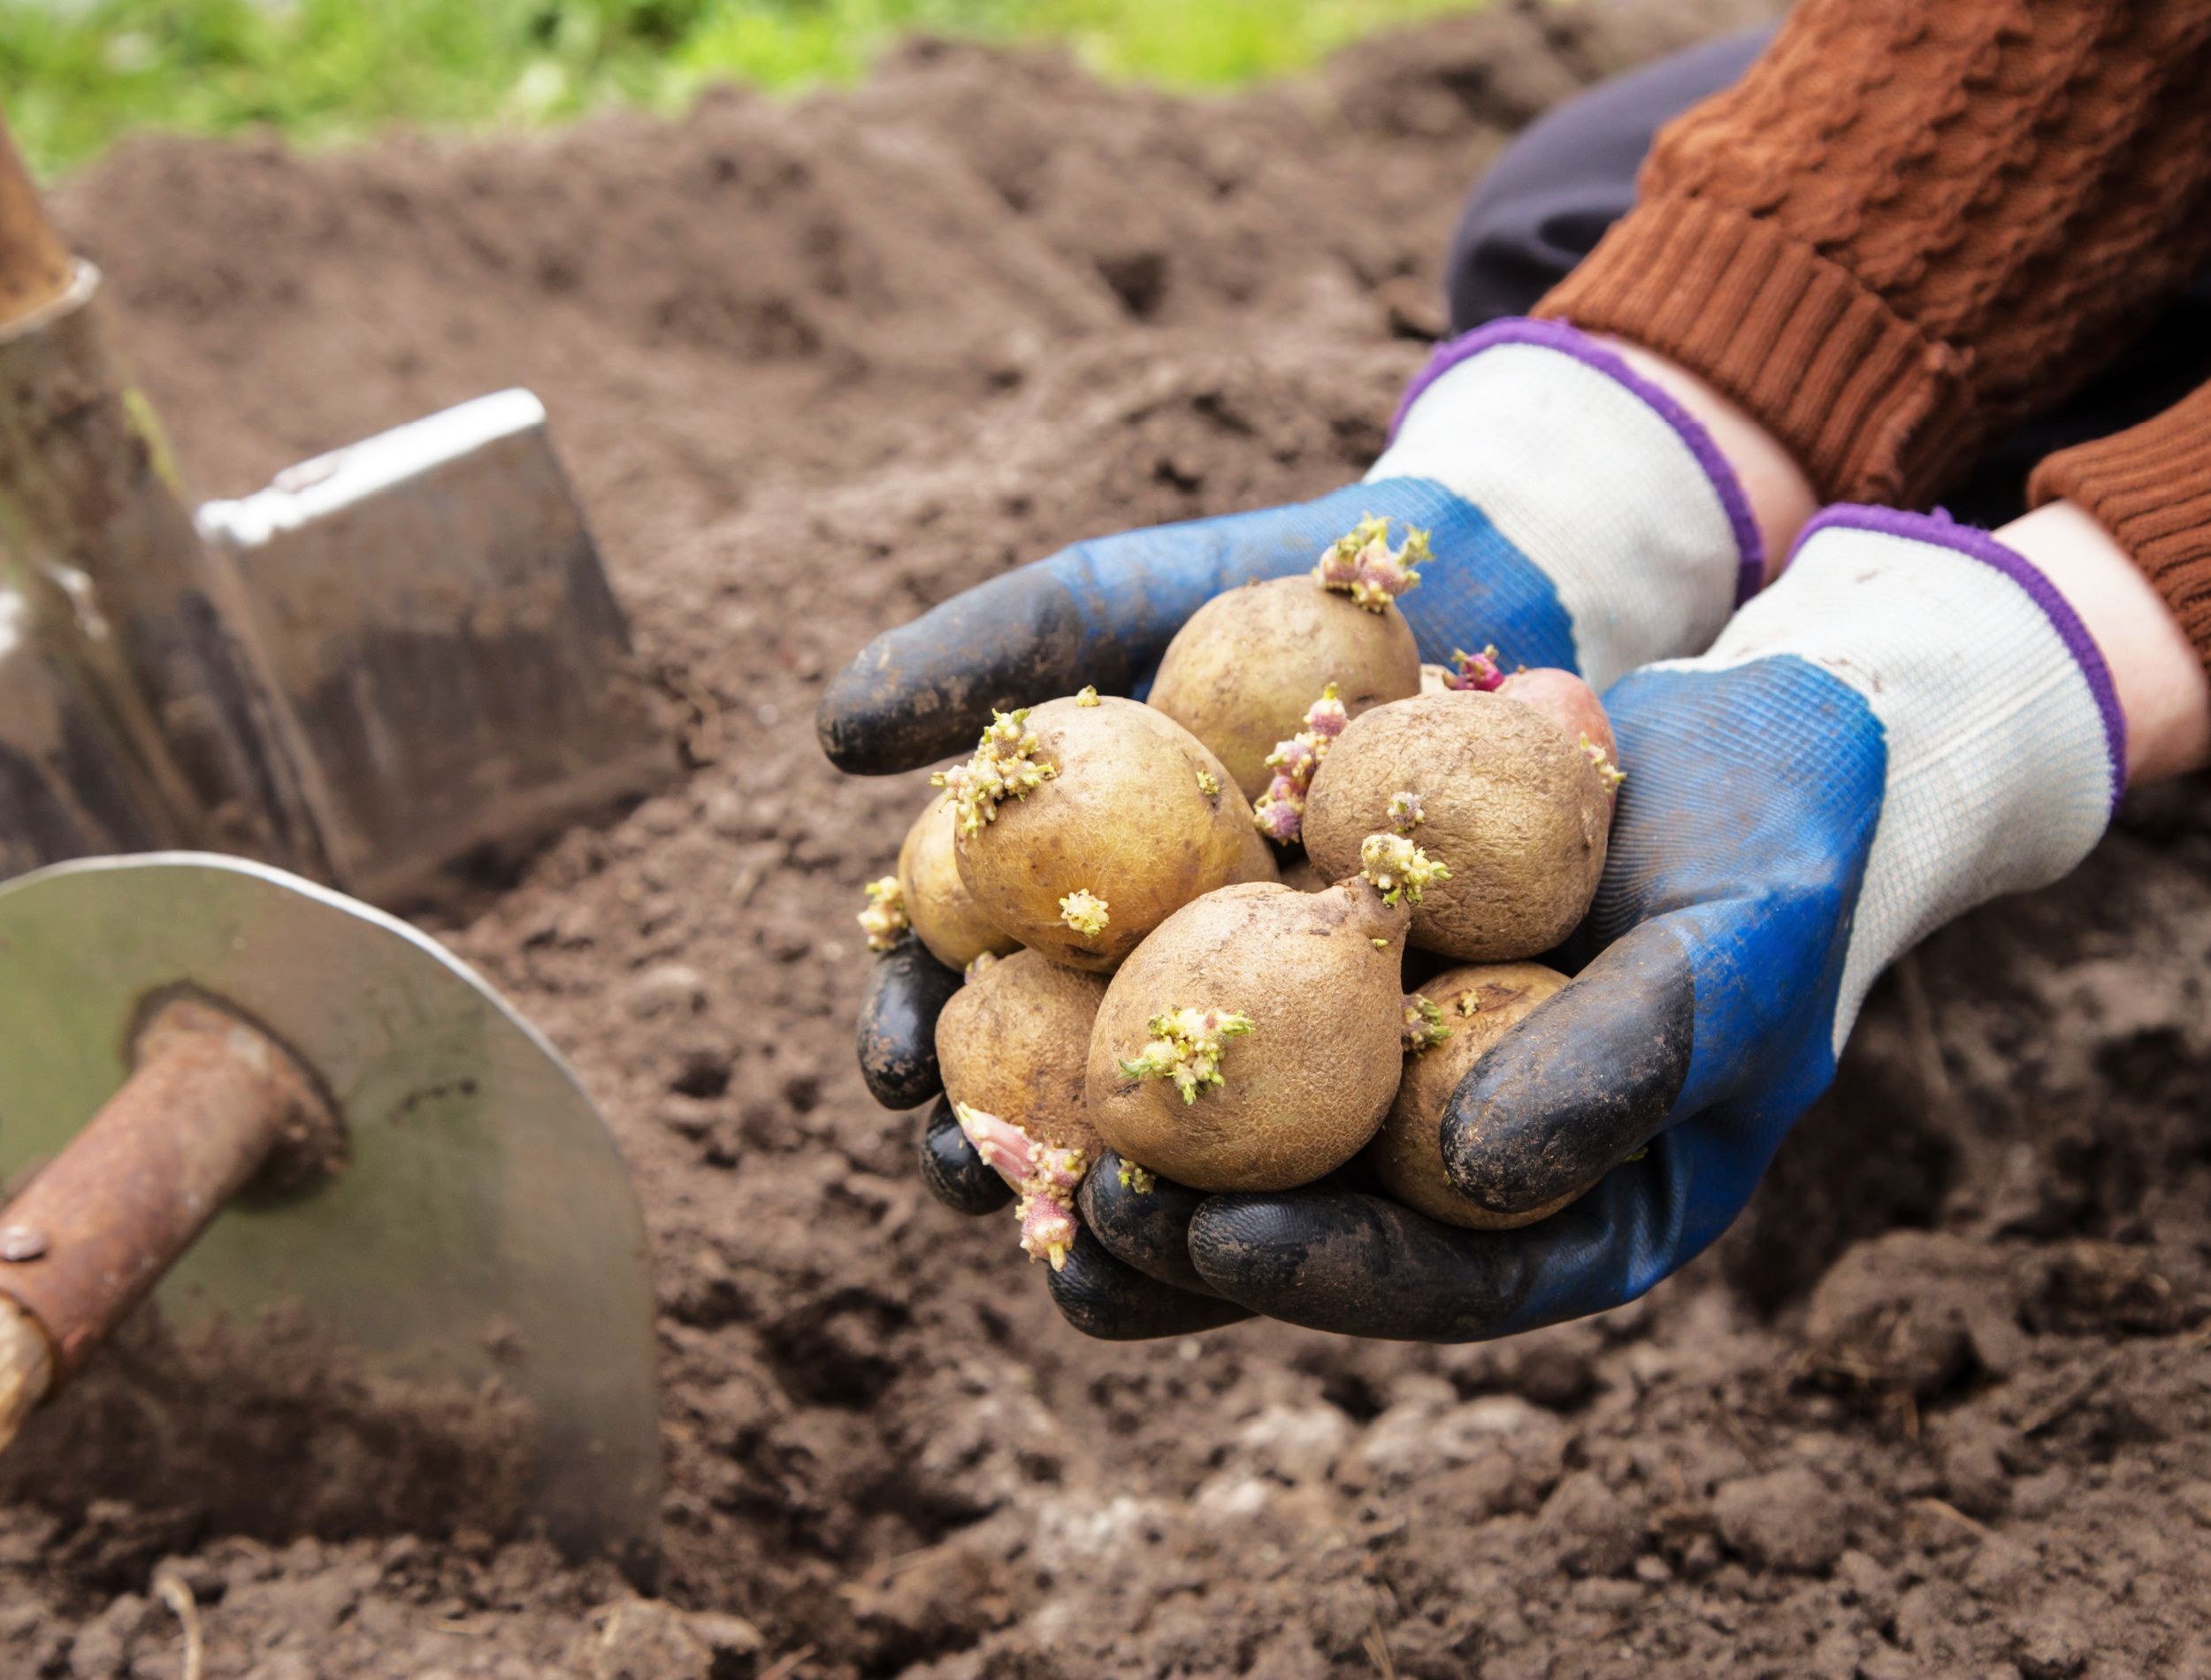 Farmer hands with seed sprouts potatoes in soil in garden. Growing organic vegetables, agriculture. Sowing potato